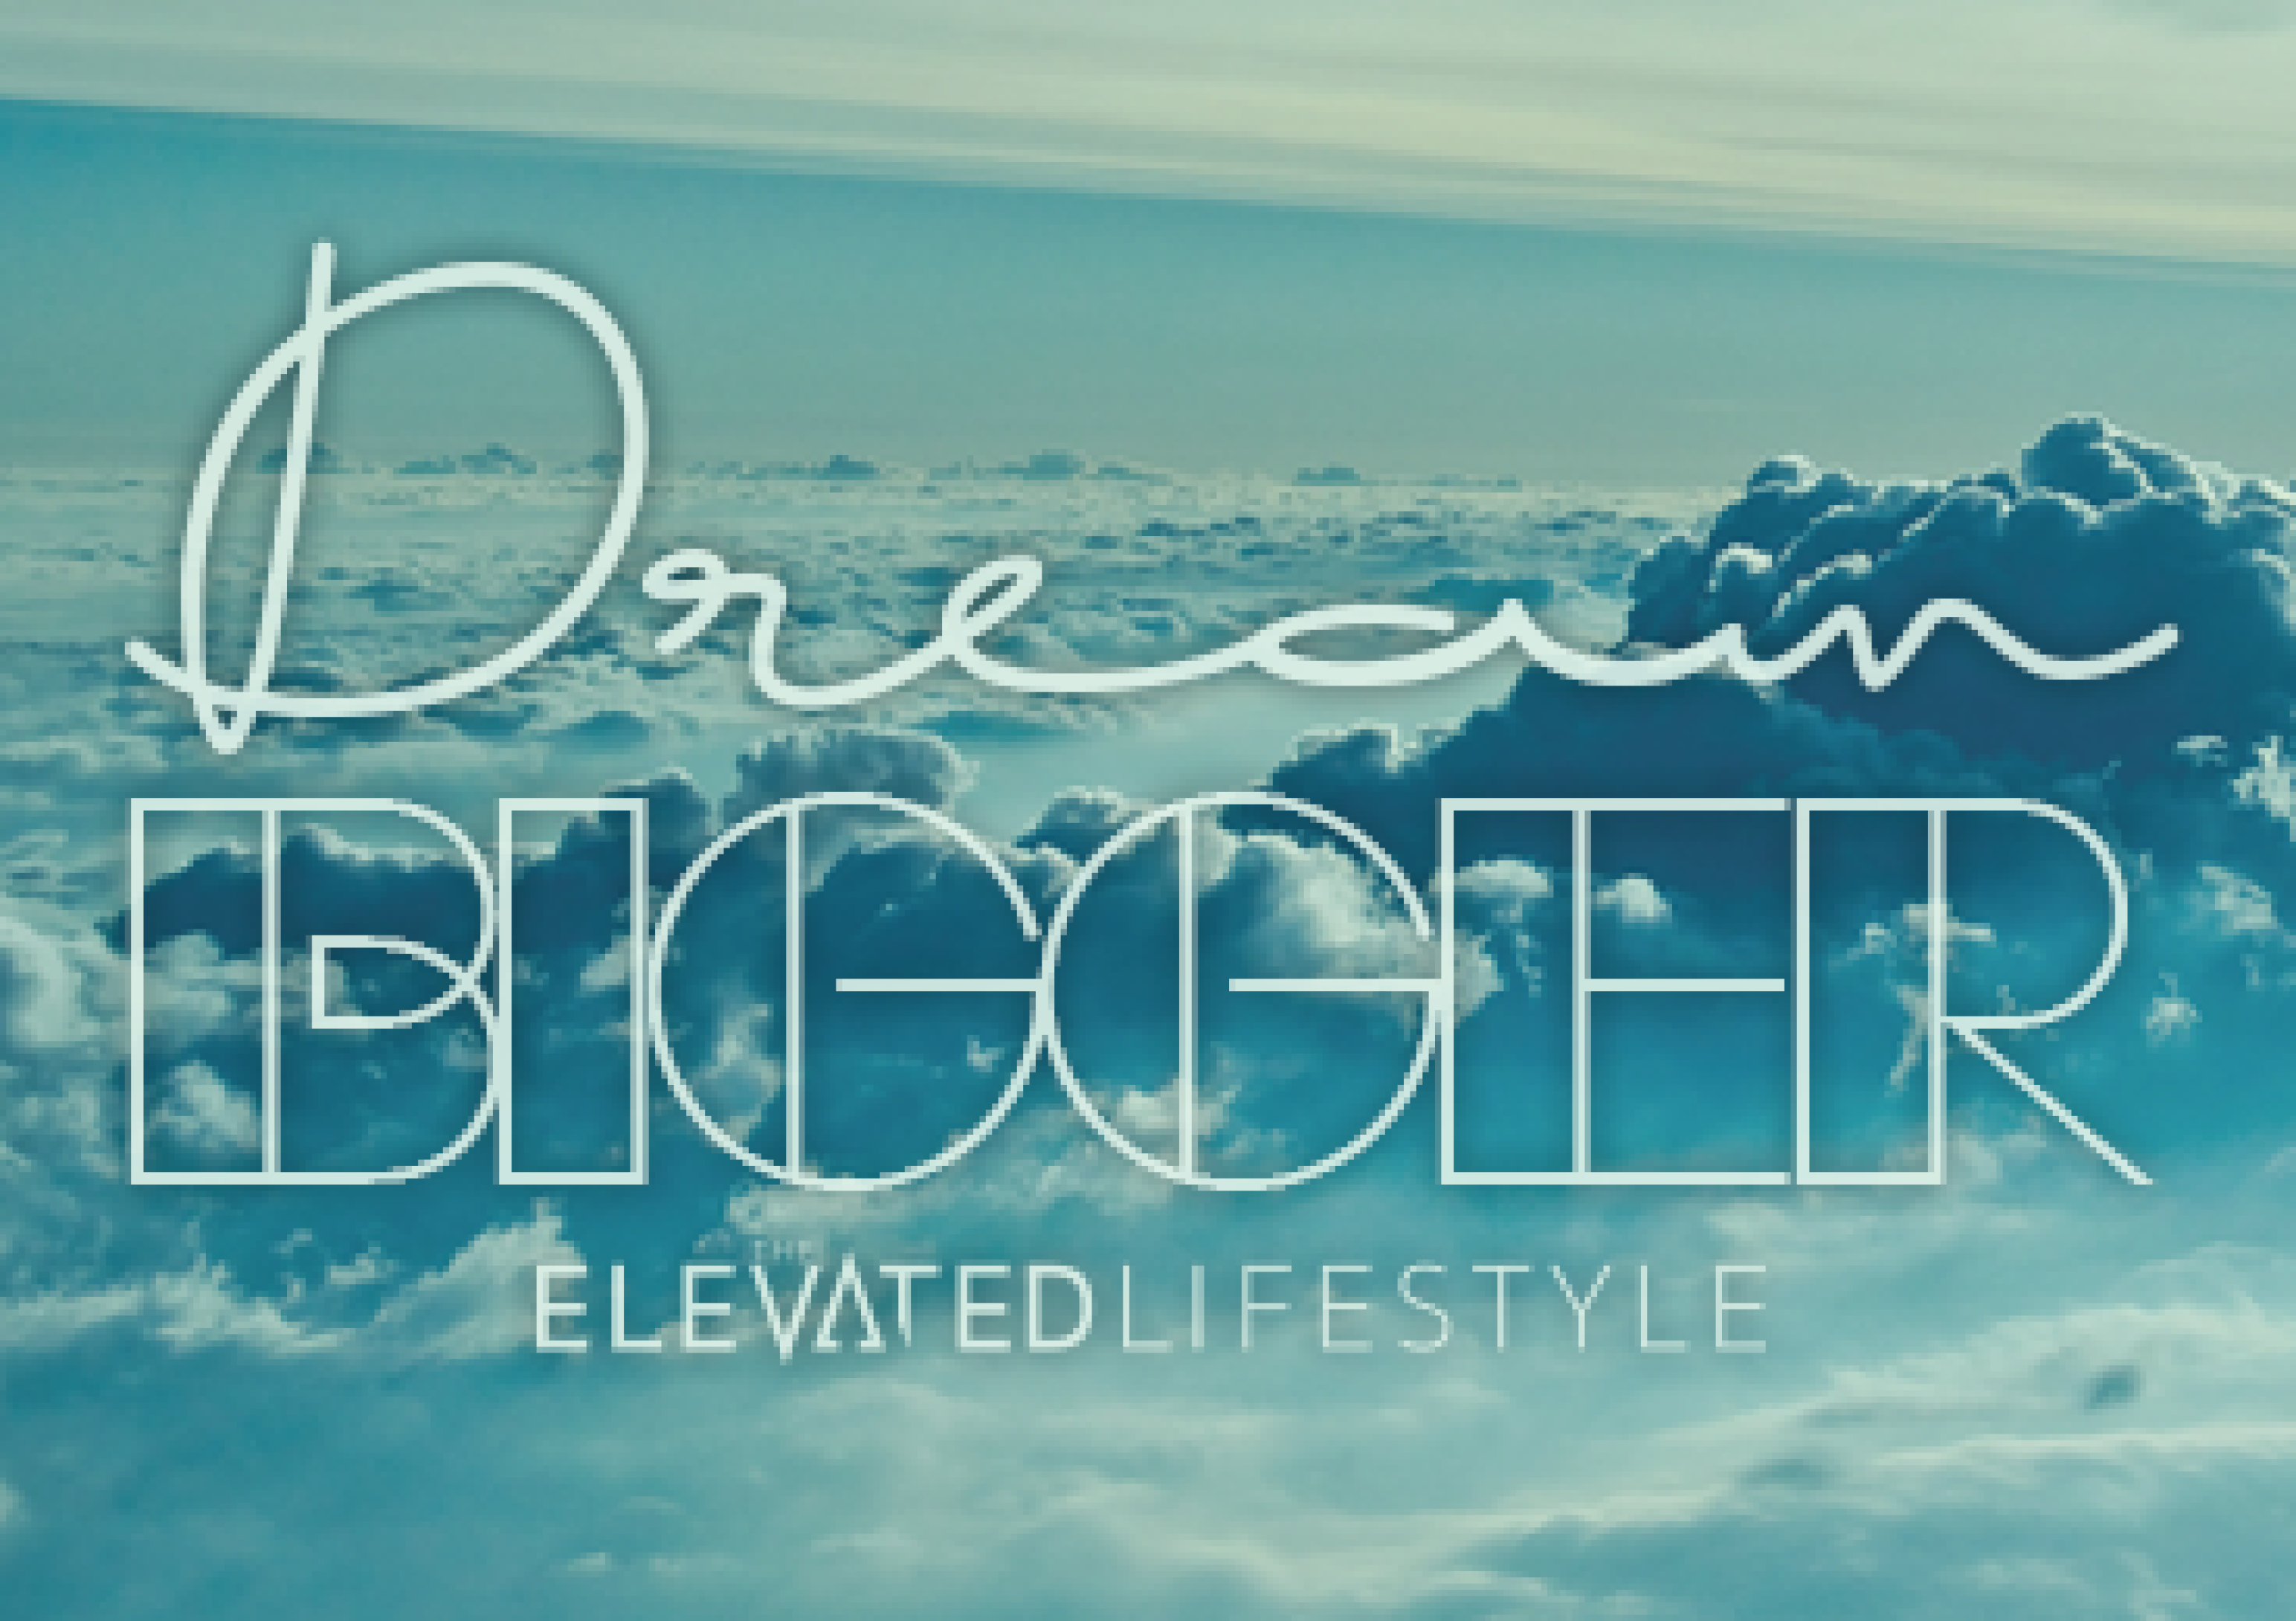 The Elevated Lifestyle